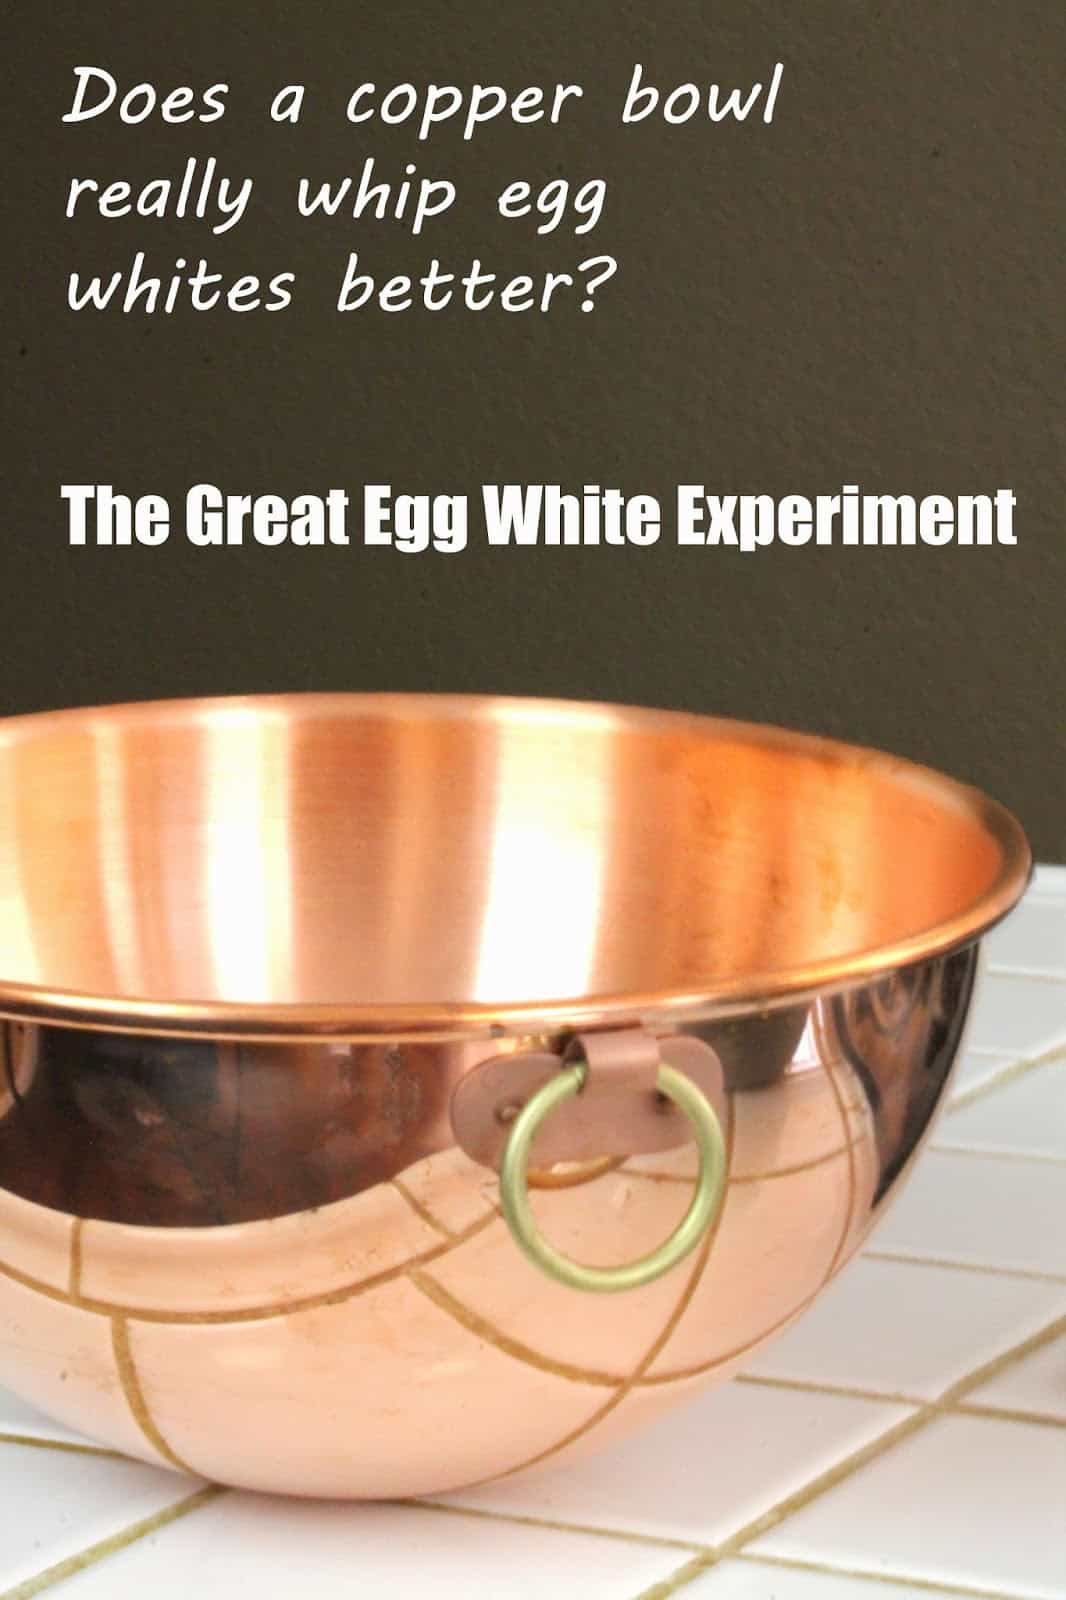 A copper bowl with the words "Does a copper bowl really whip egg whites better? The great egg white experiment" above and below it